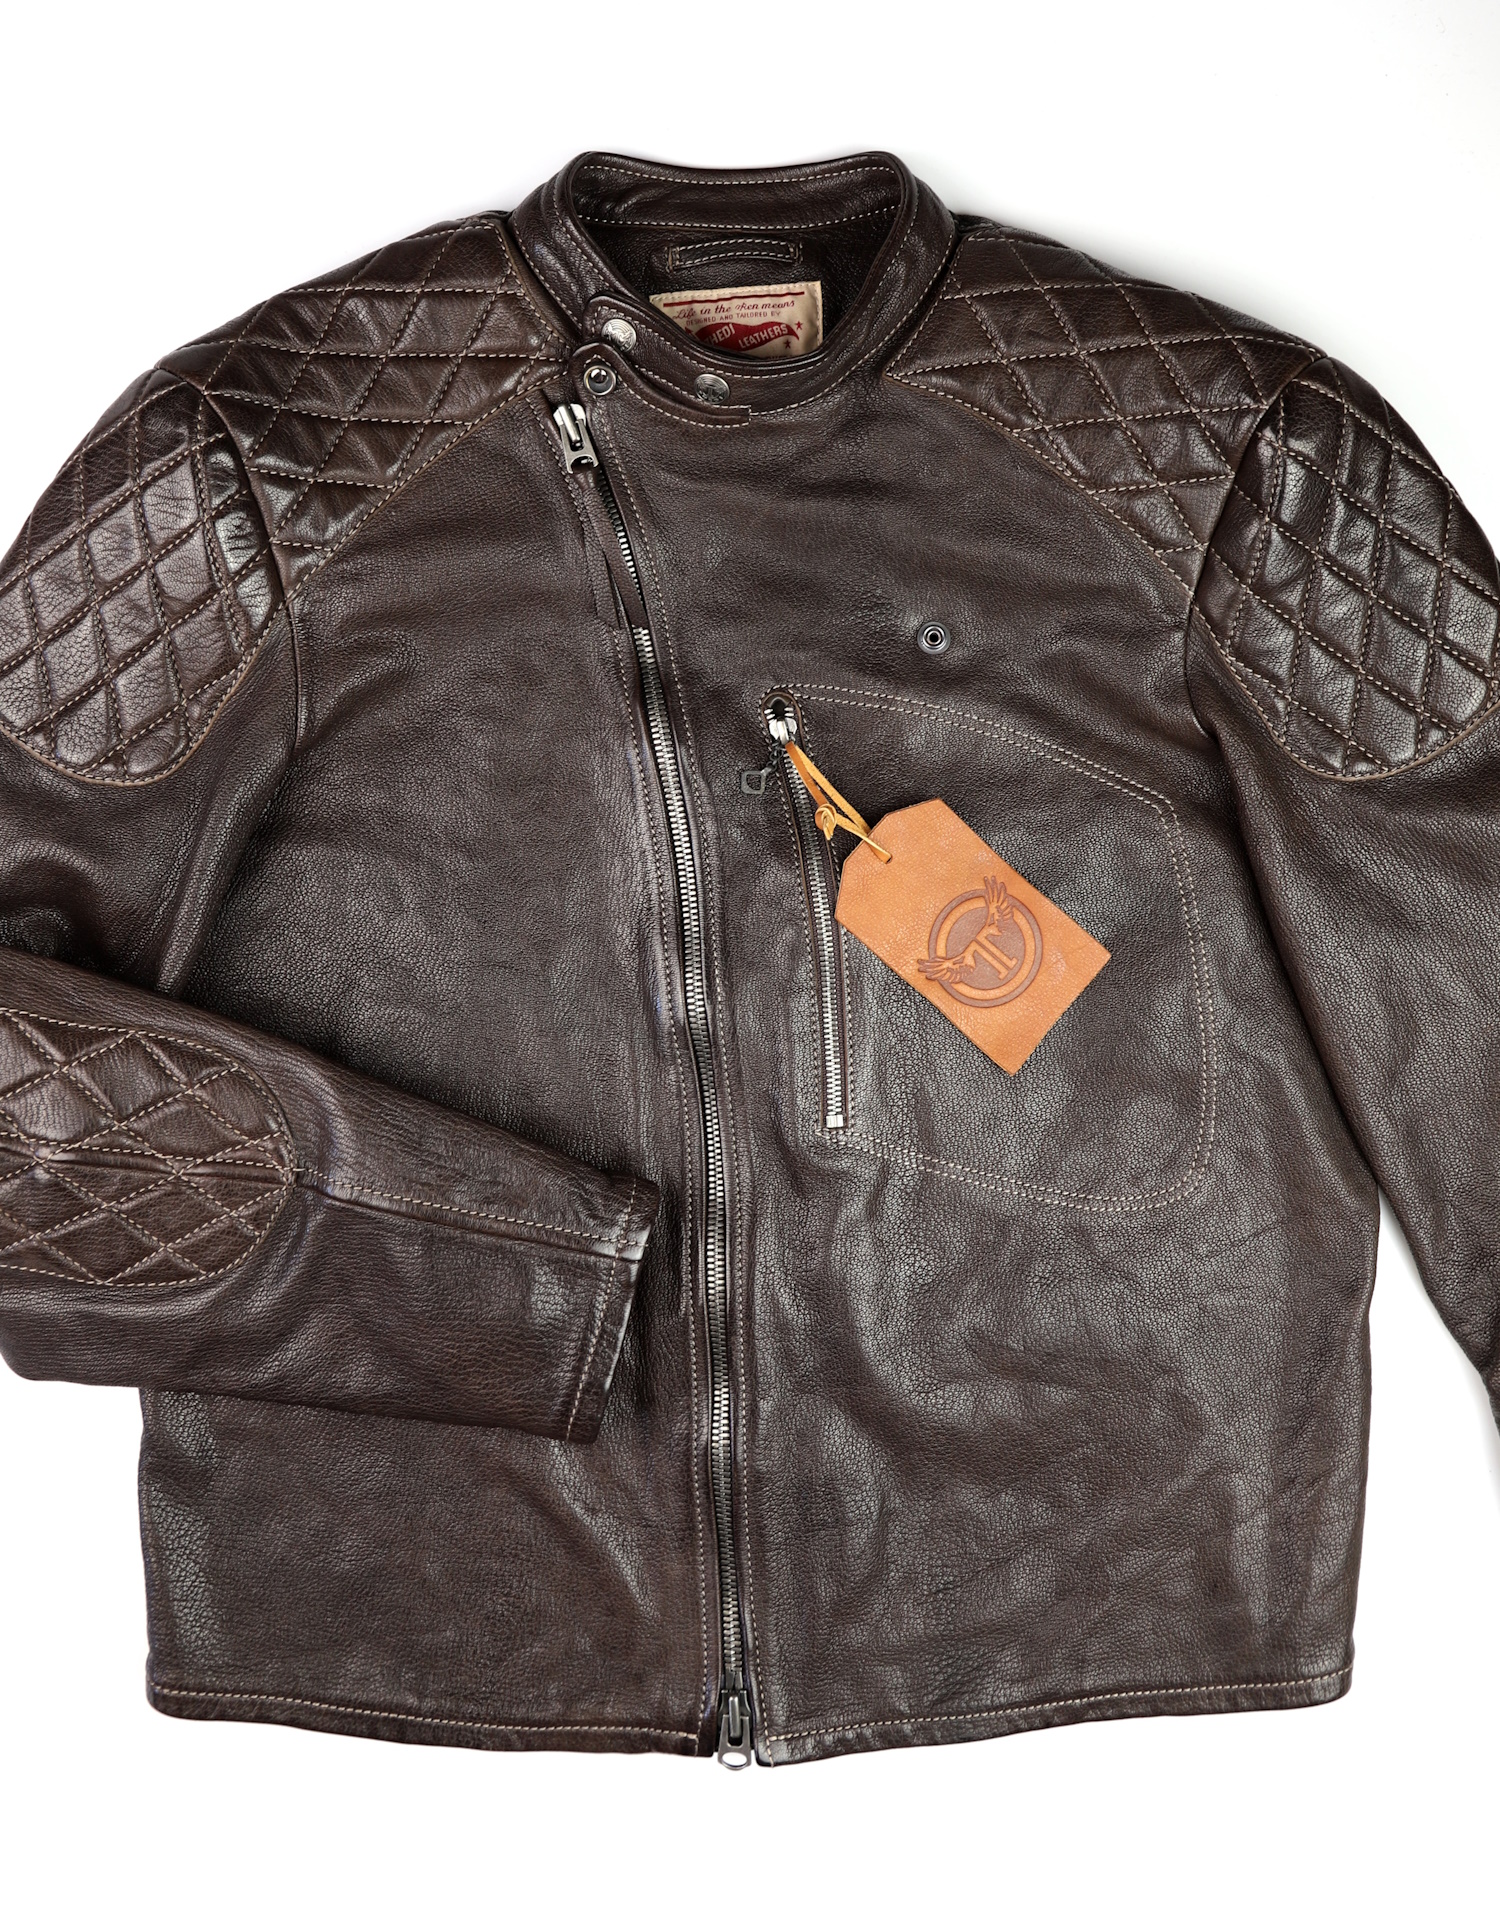 Thedi Maximos Cafe Racer Brown Calabria Goatskin Large front.jpg